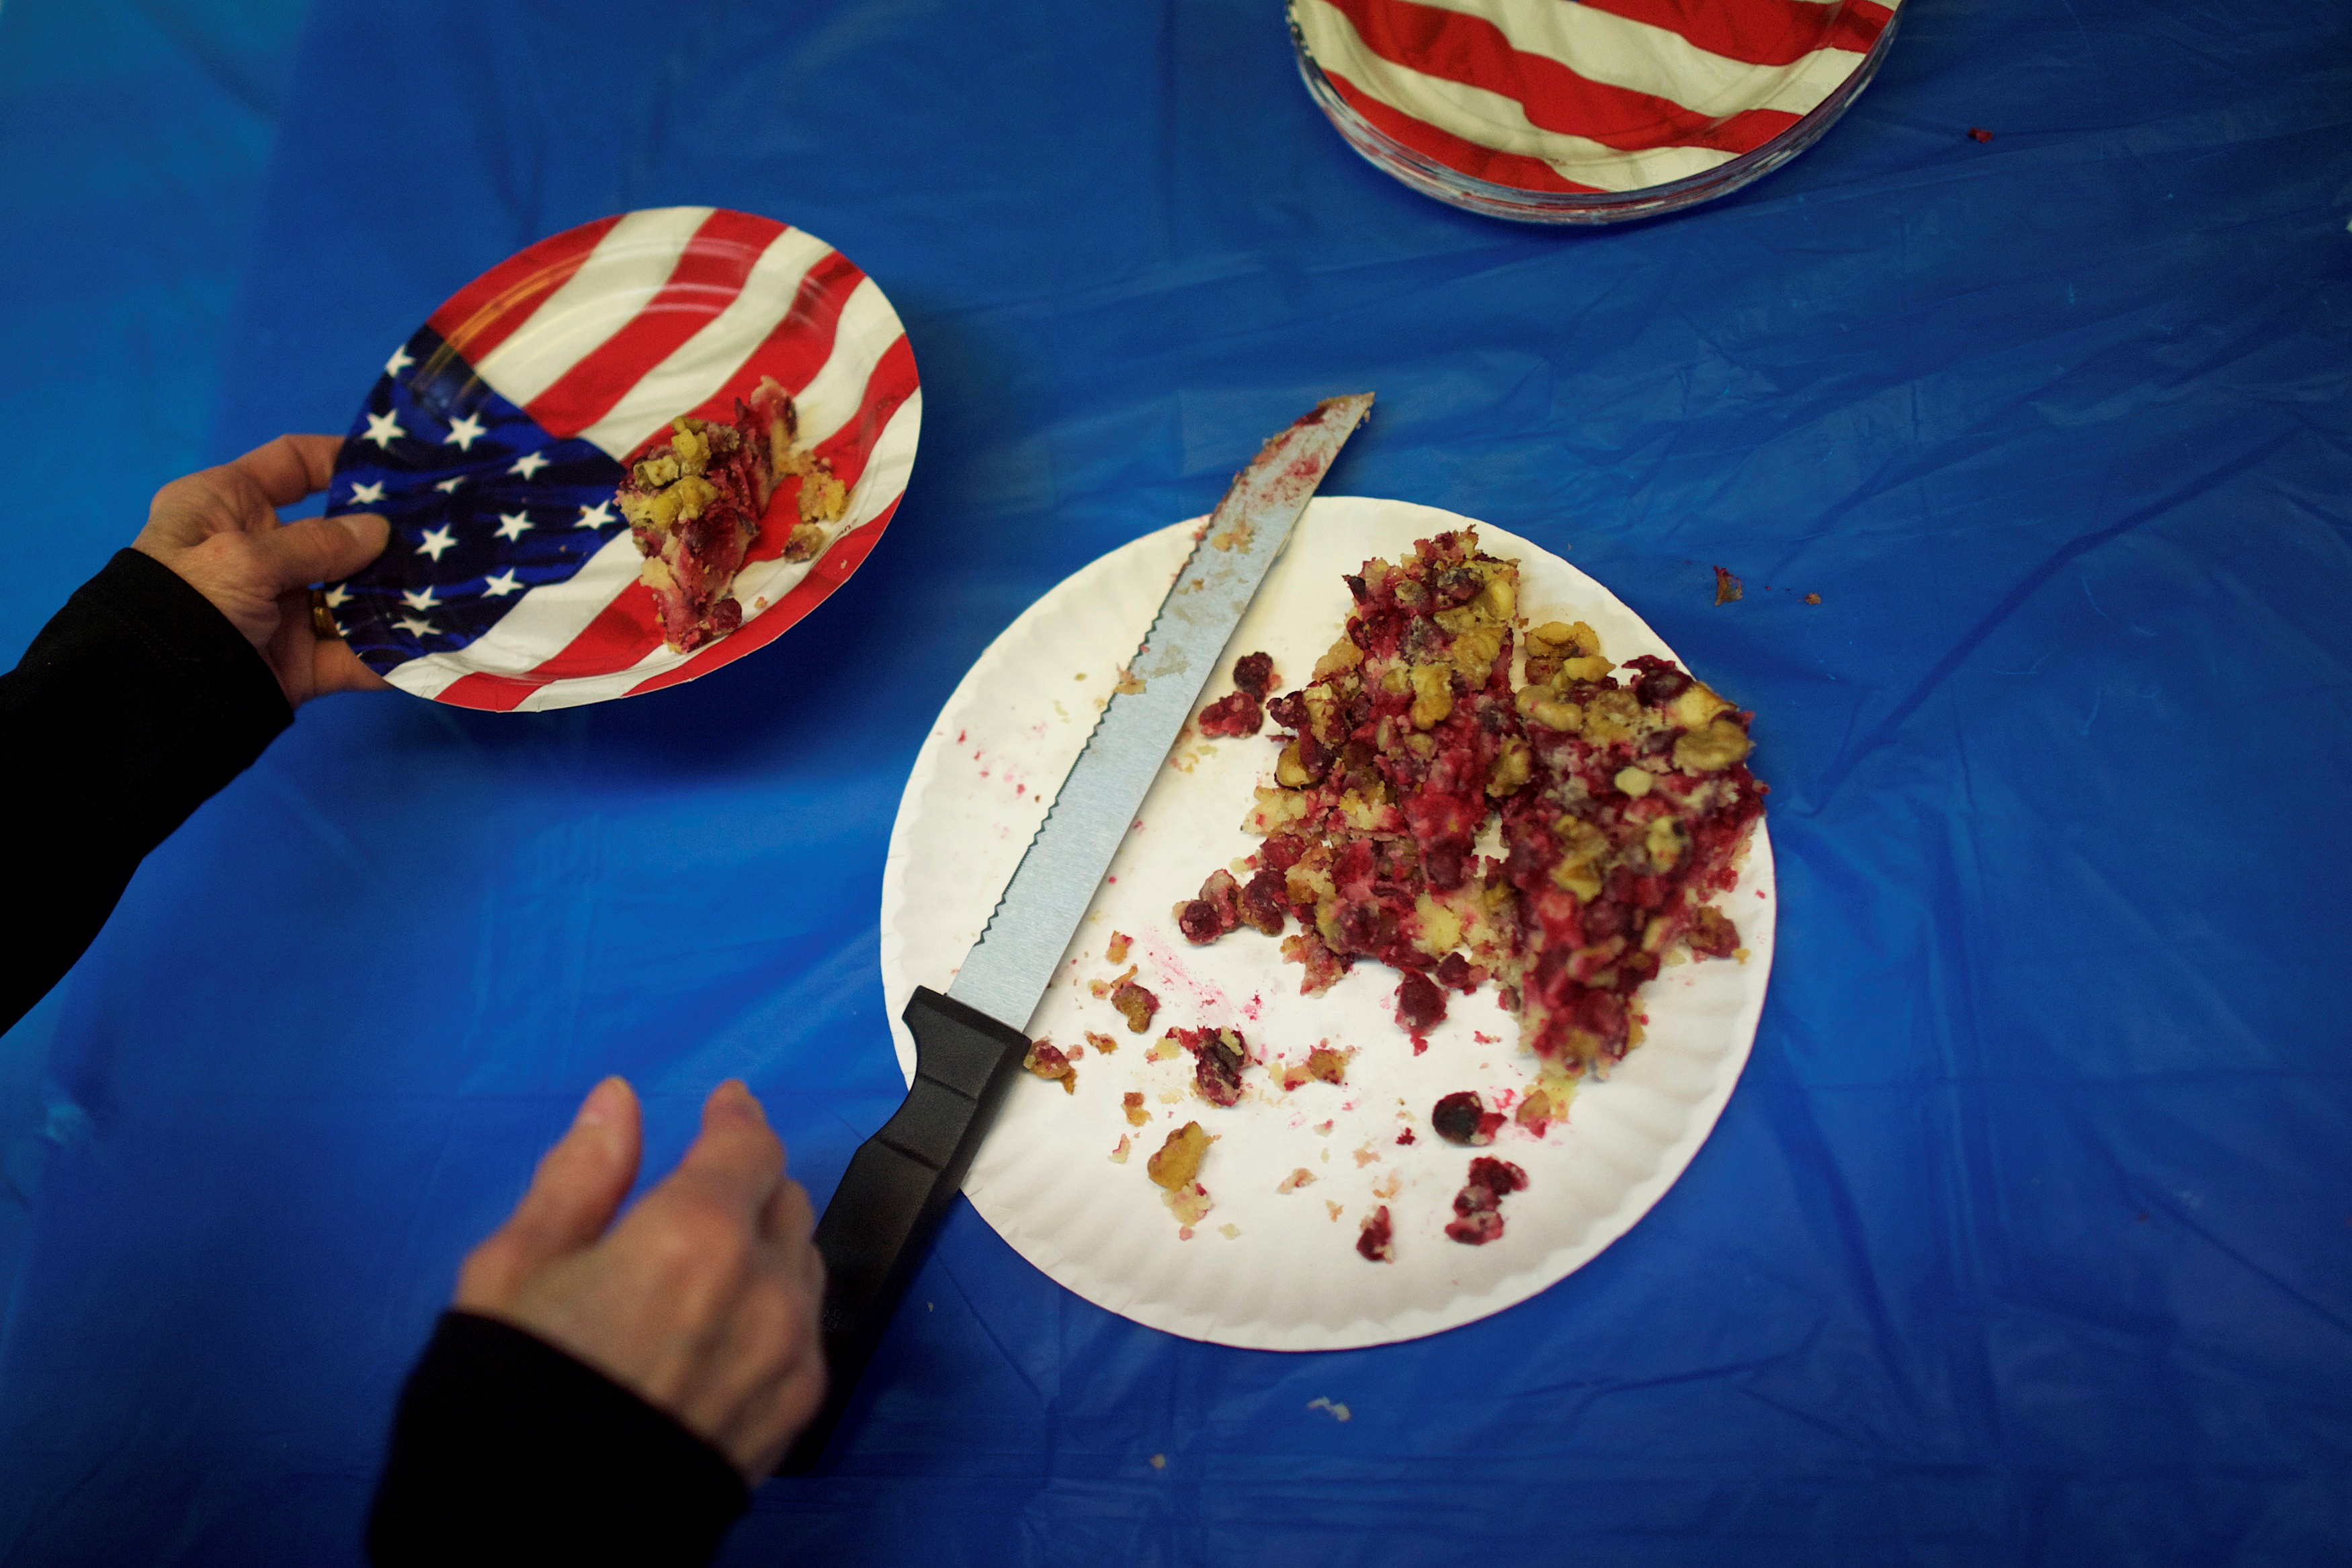 Volunteer Scerbo places a piece of cranberry cake onto a paper plate during a break from phone calls at the York County Democratic Headquarters on U.S. midterm election day in York